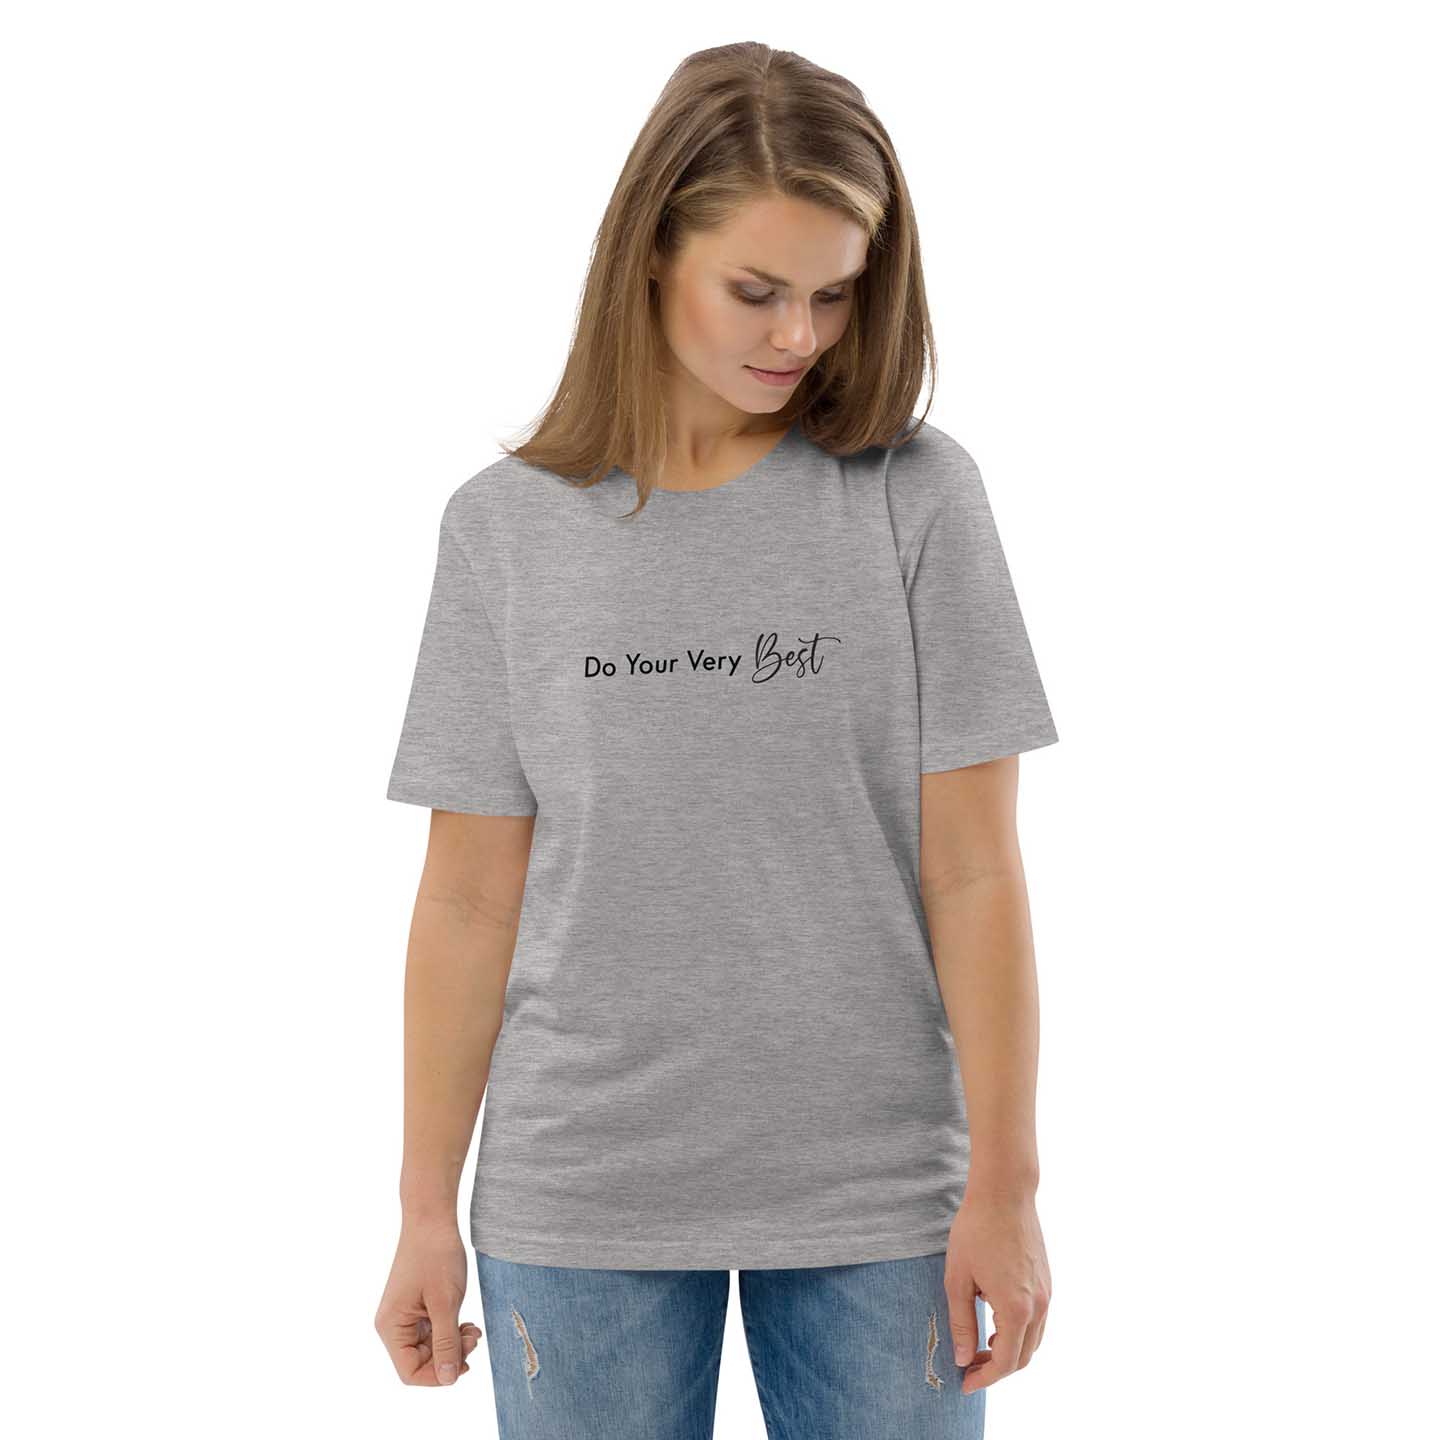 Women gray 100% organic cotton t-shirt with motivational quote, "Do Your Very Best."